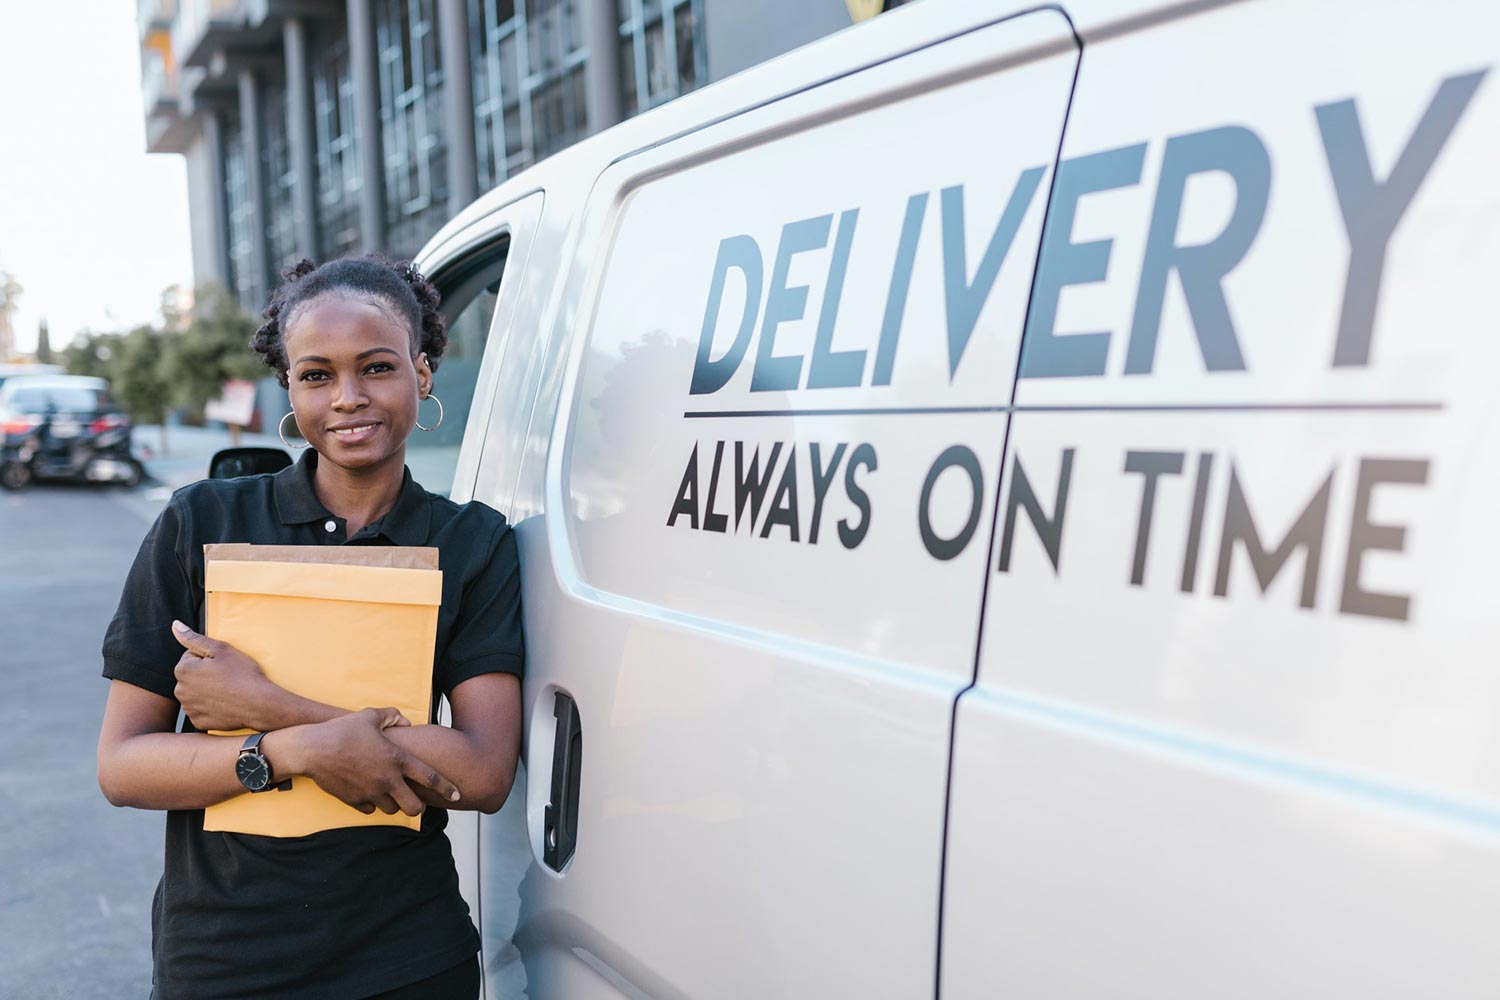 A Female Courier In Front Of The Delivery Service Van